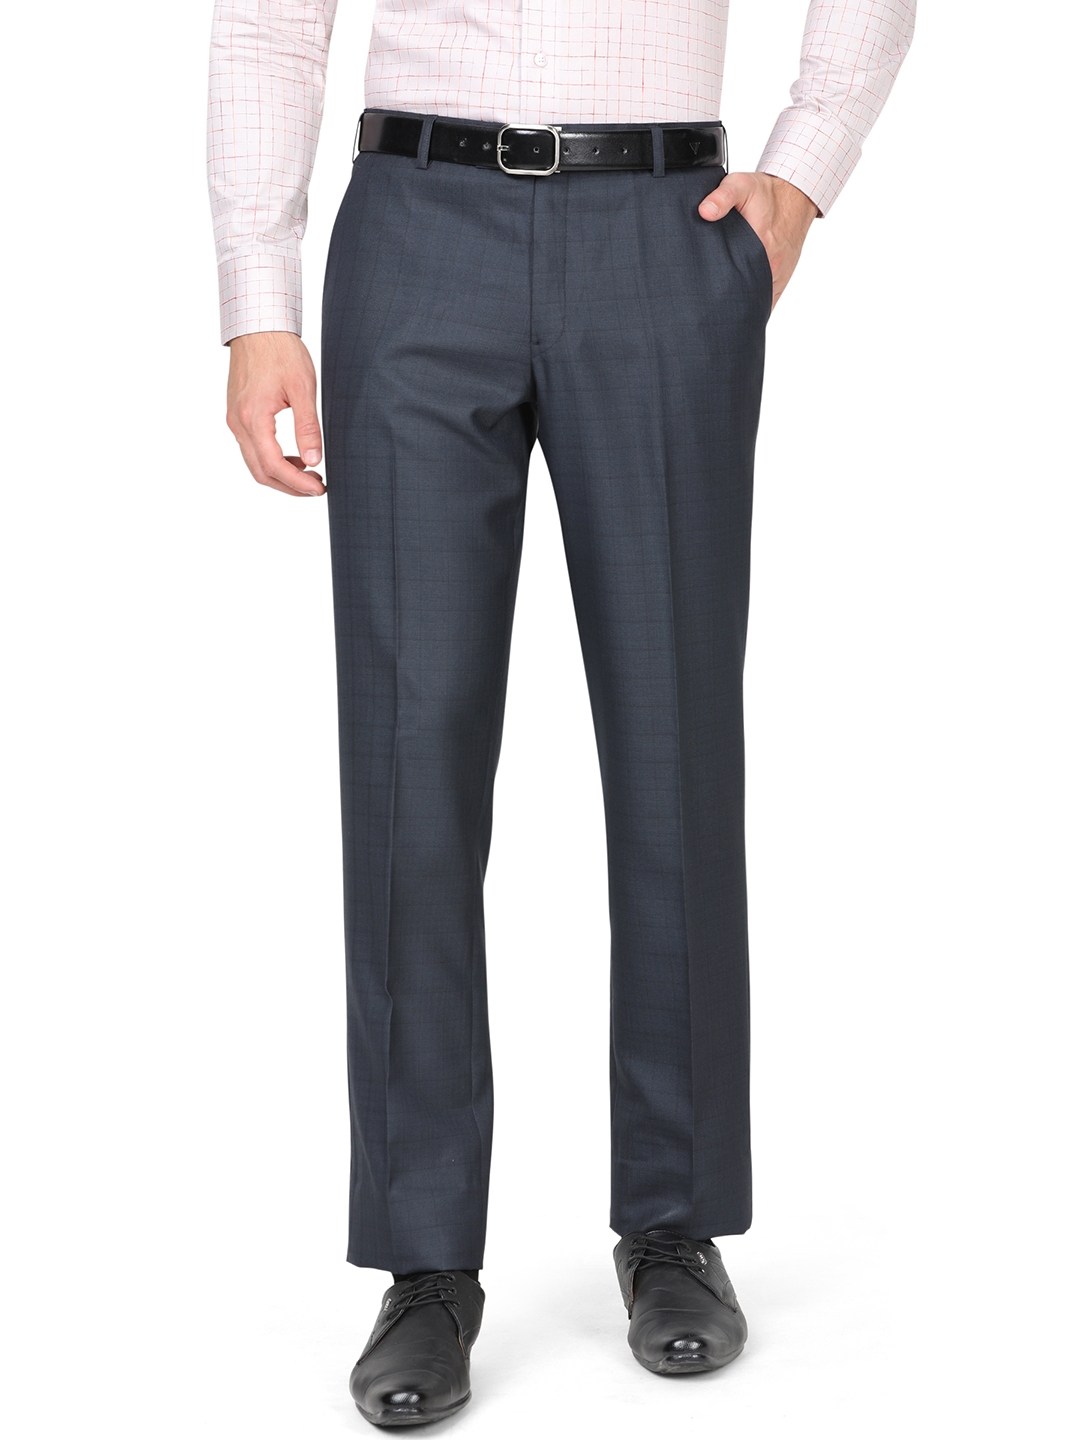 Greenfibre | Blue Checked Classic Fit Formal Trouser | Greenfibre